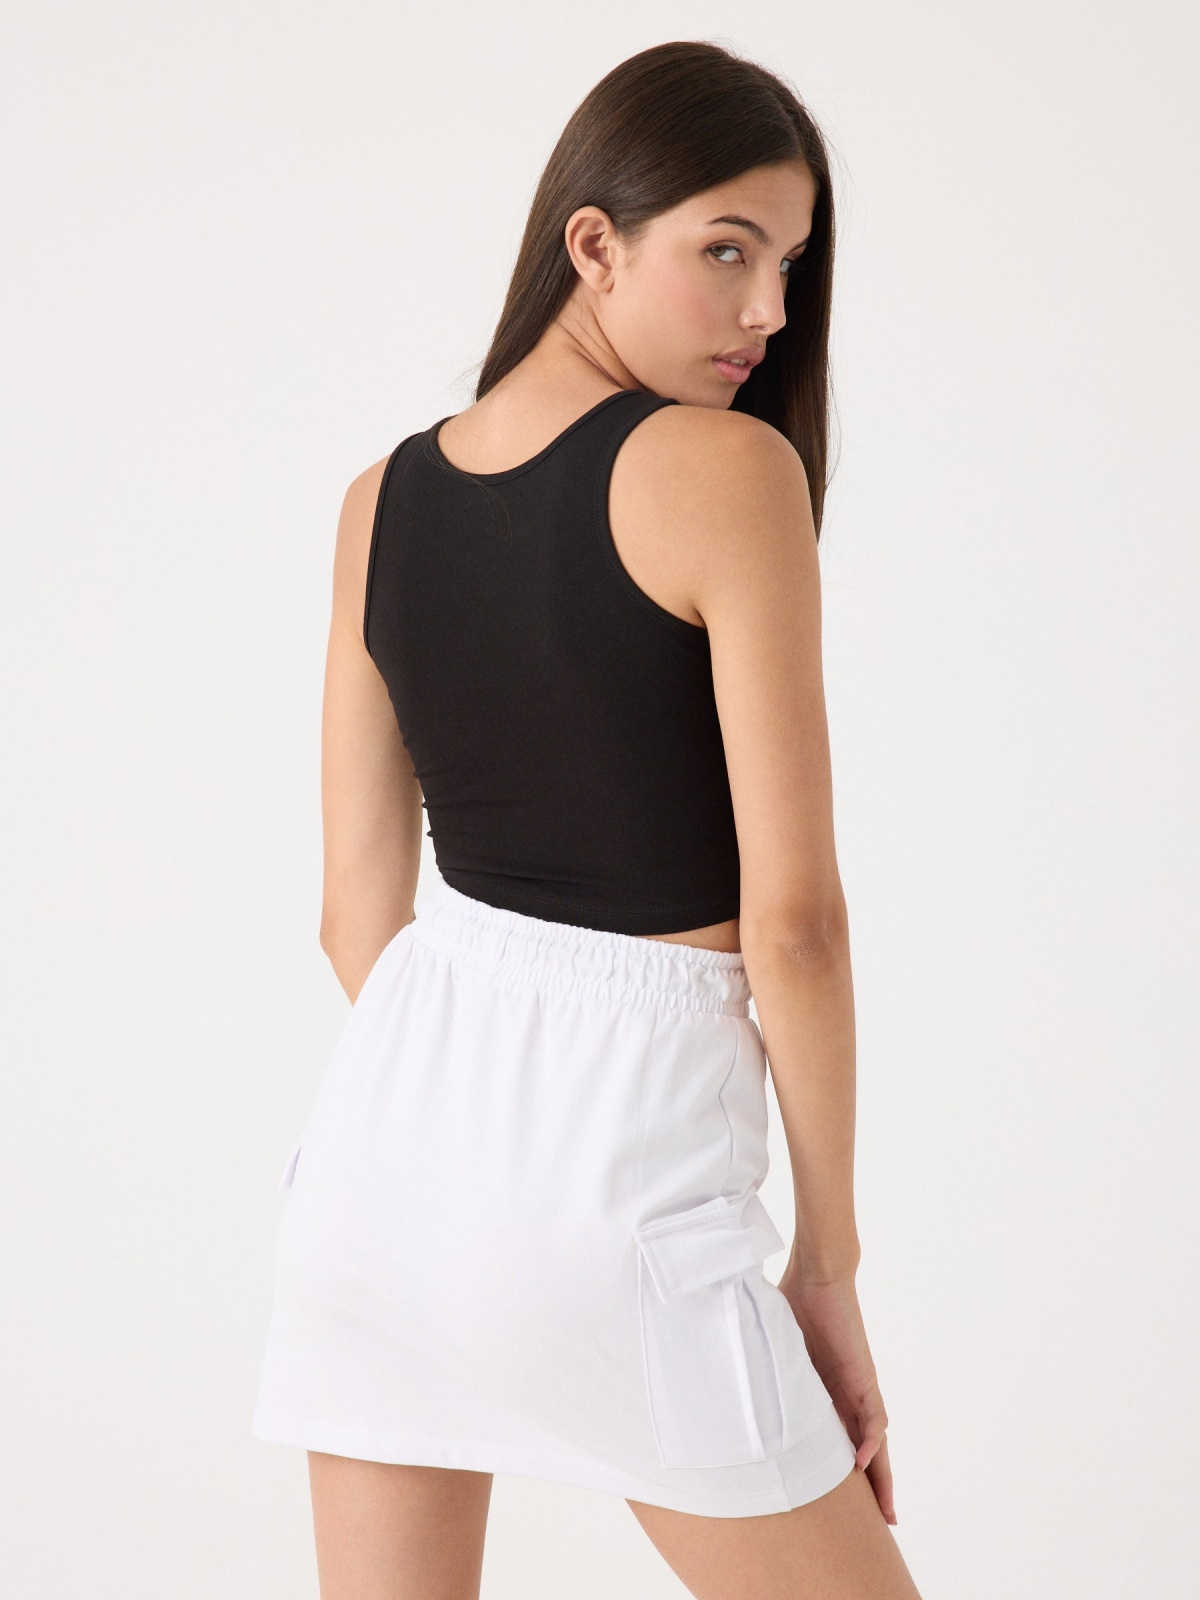 Adjustable cargo skirt white middle back view